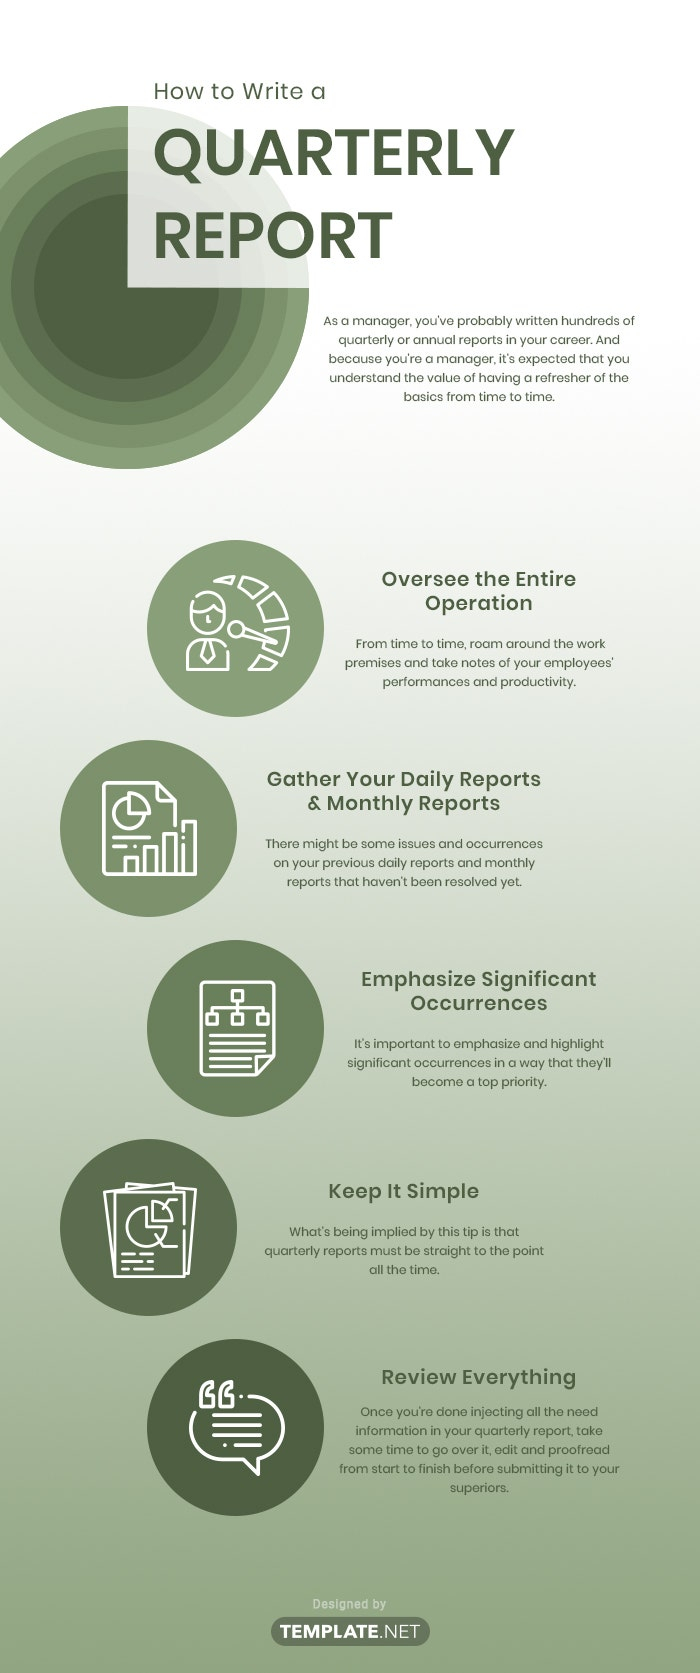 Quarterly Reports Templates - Format, Free, Download  Template.net